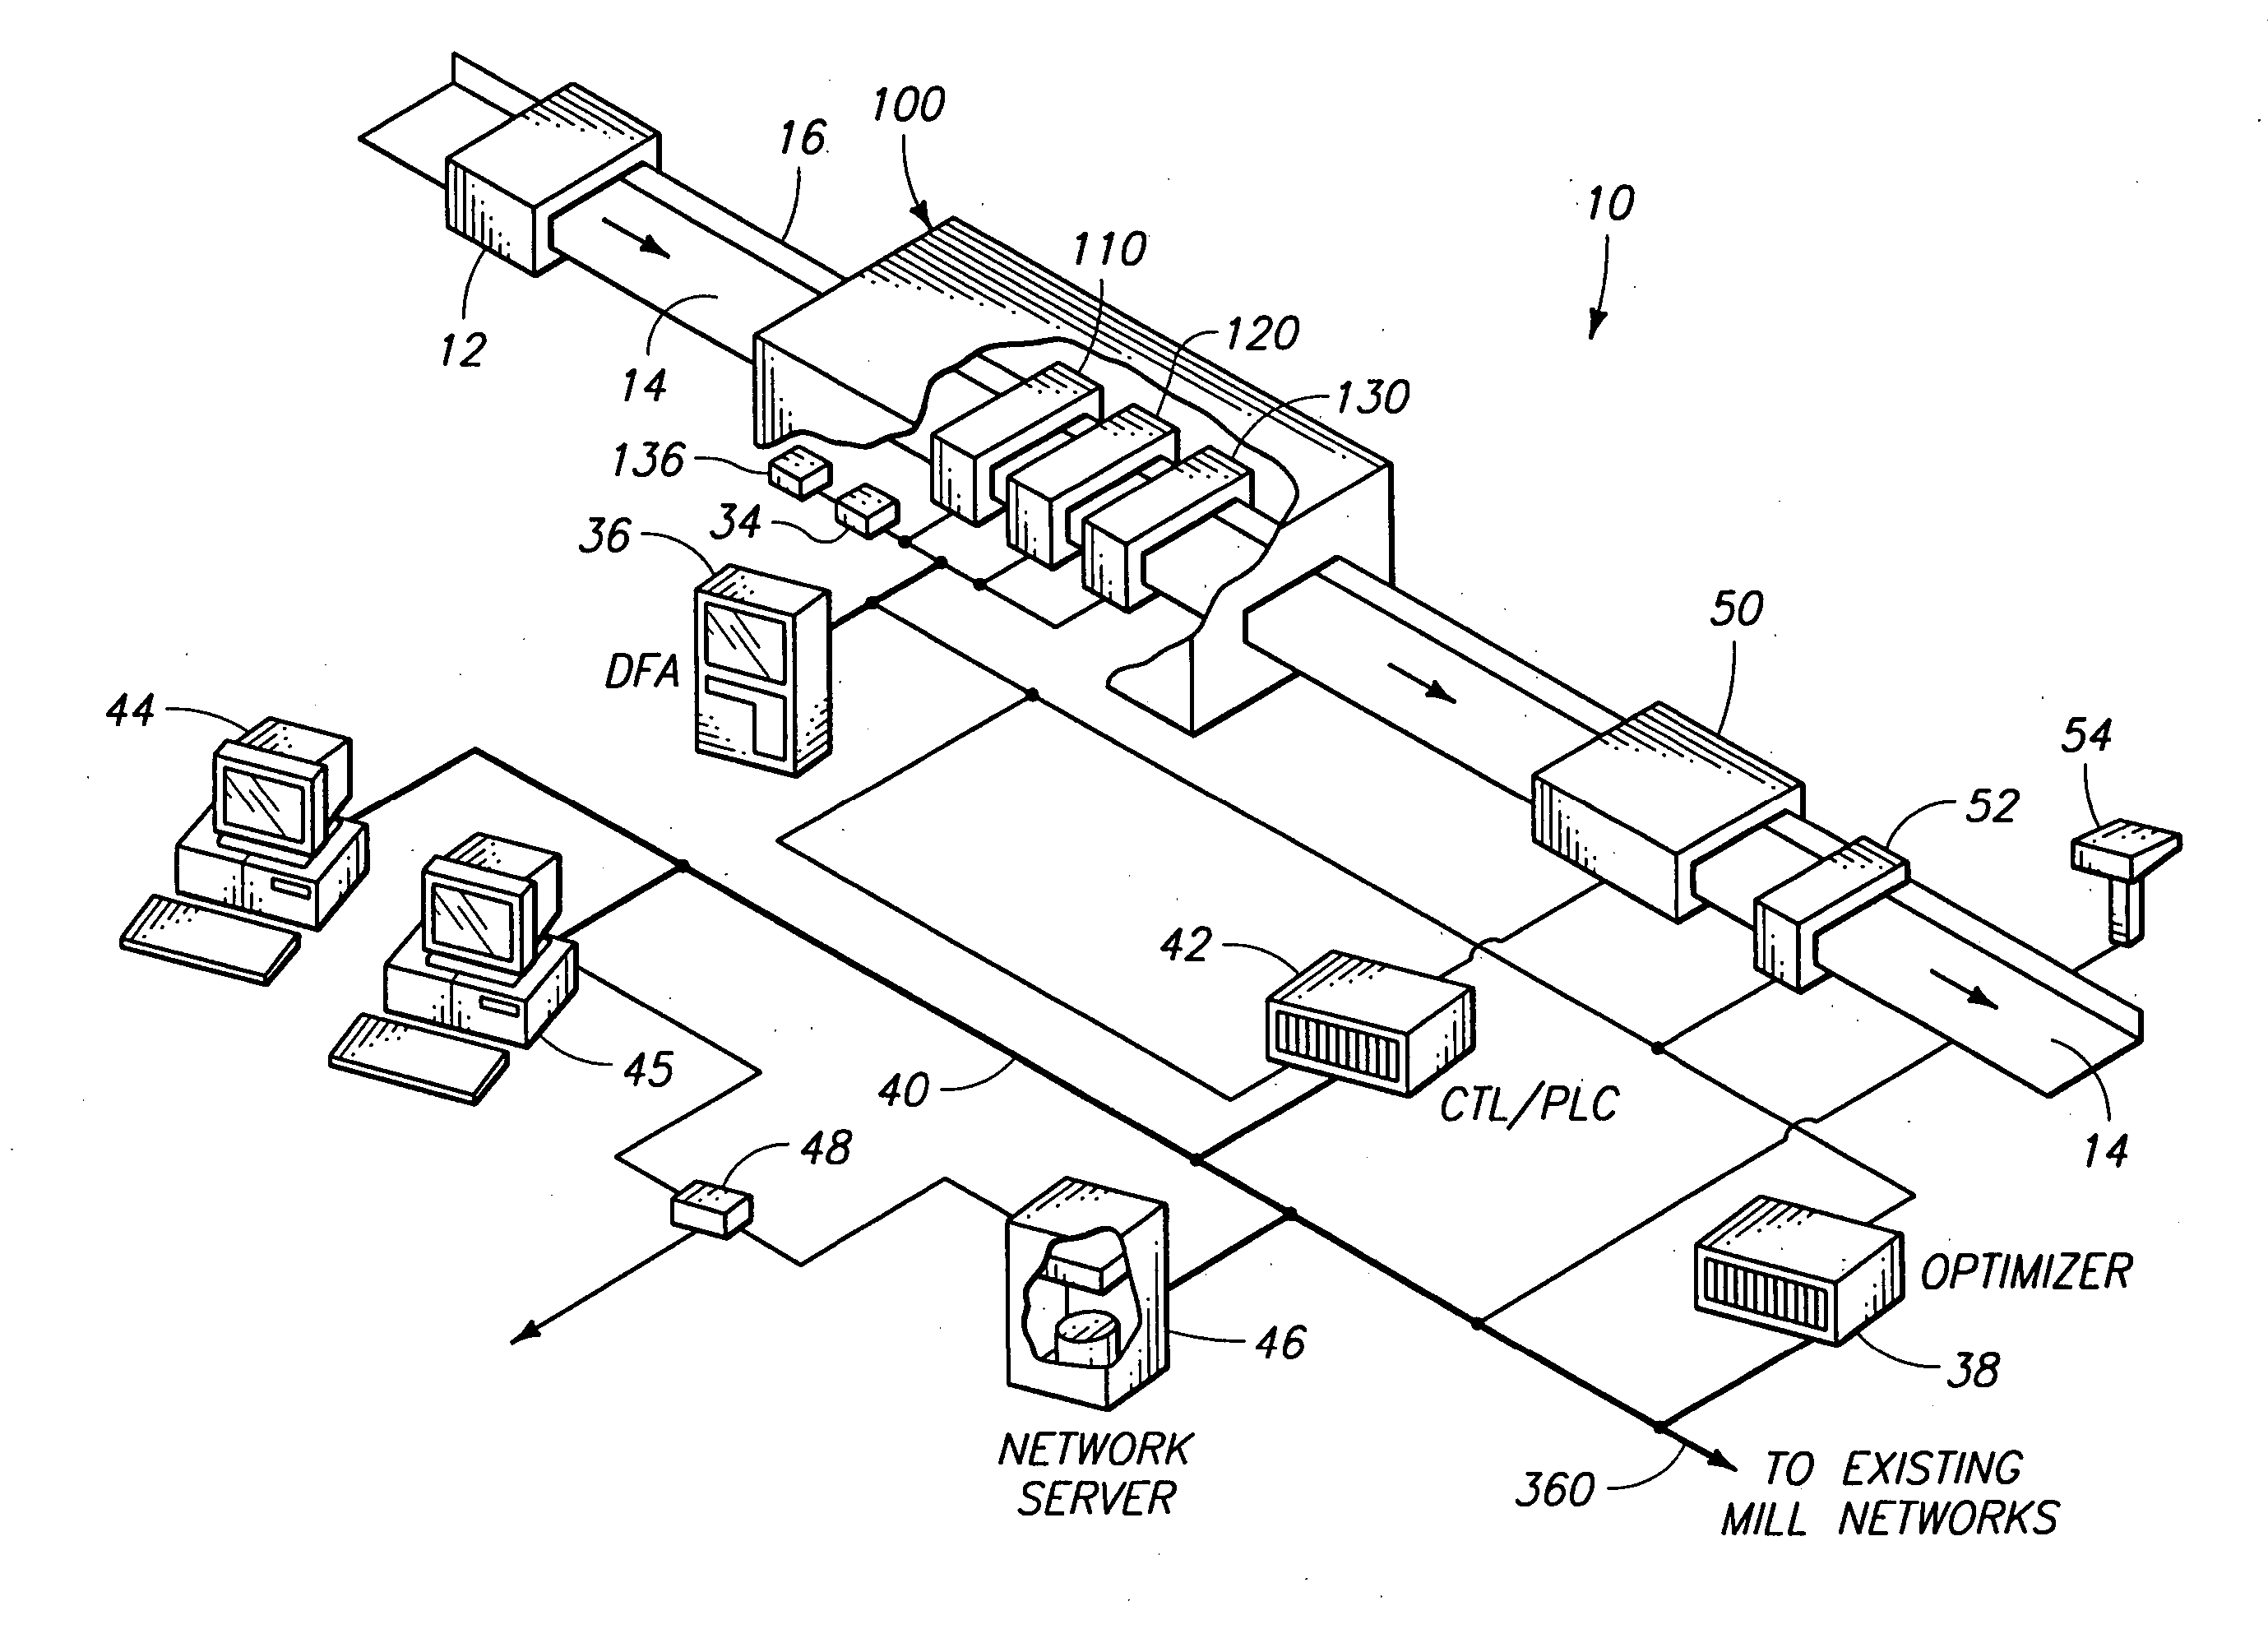 Method and apparatus for improved inspection classification of attributes of a workpiece